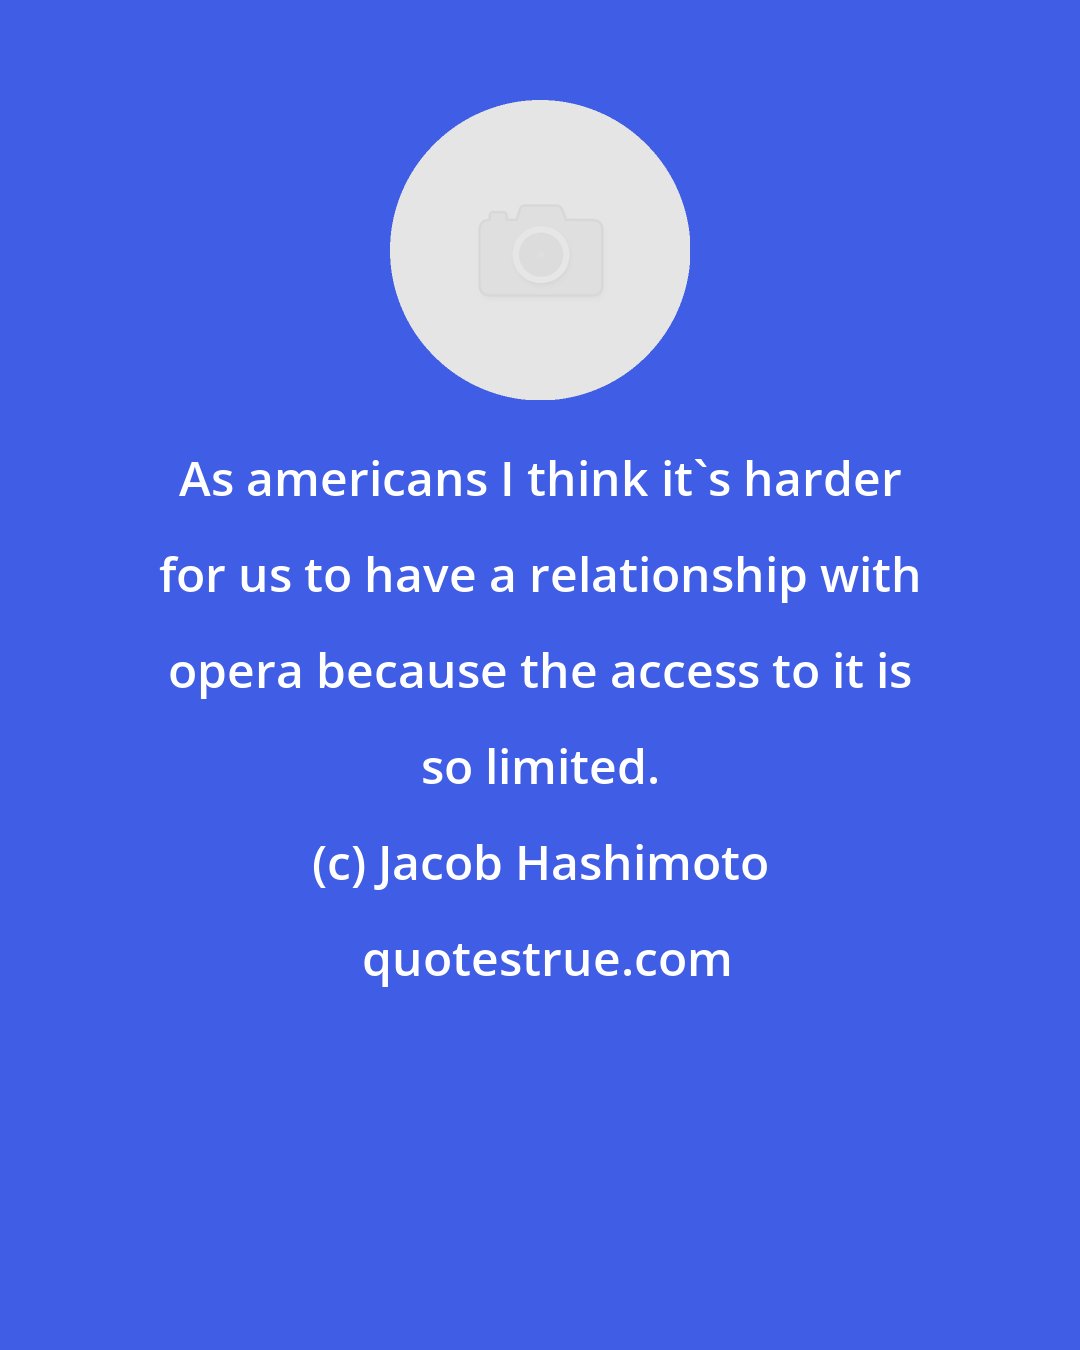 Jacob Hashimoto: As americans I think it's harder for us to have a relationship with opera because the access to it is so limited.